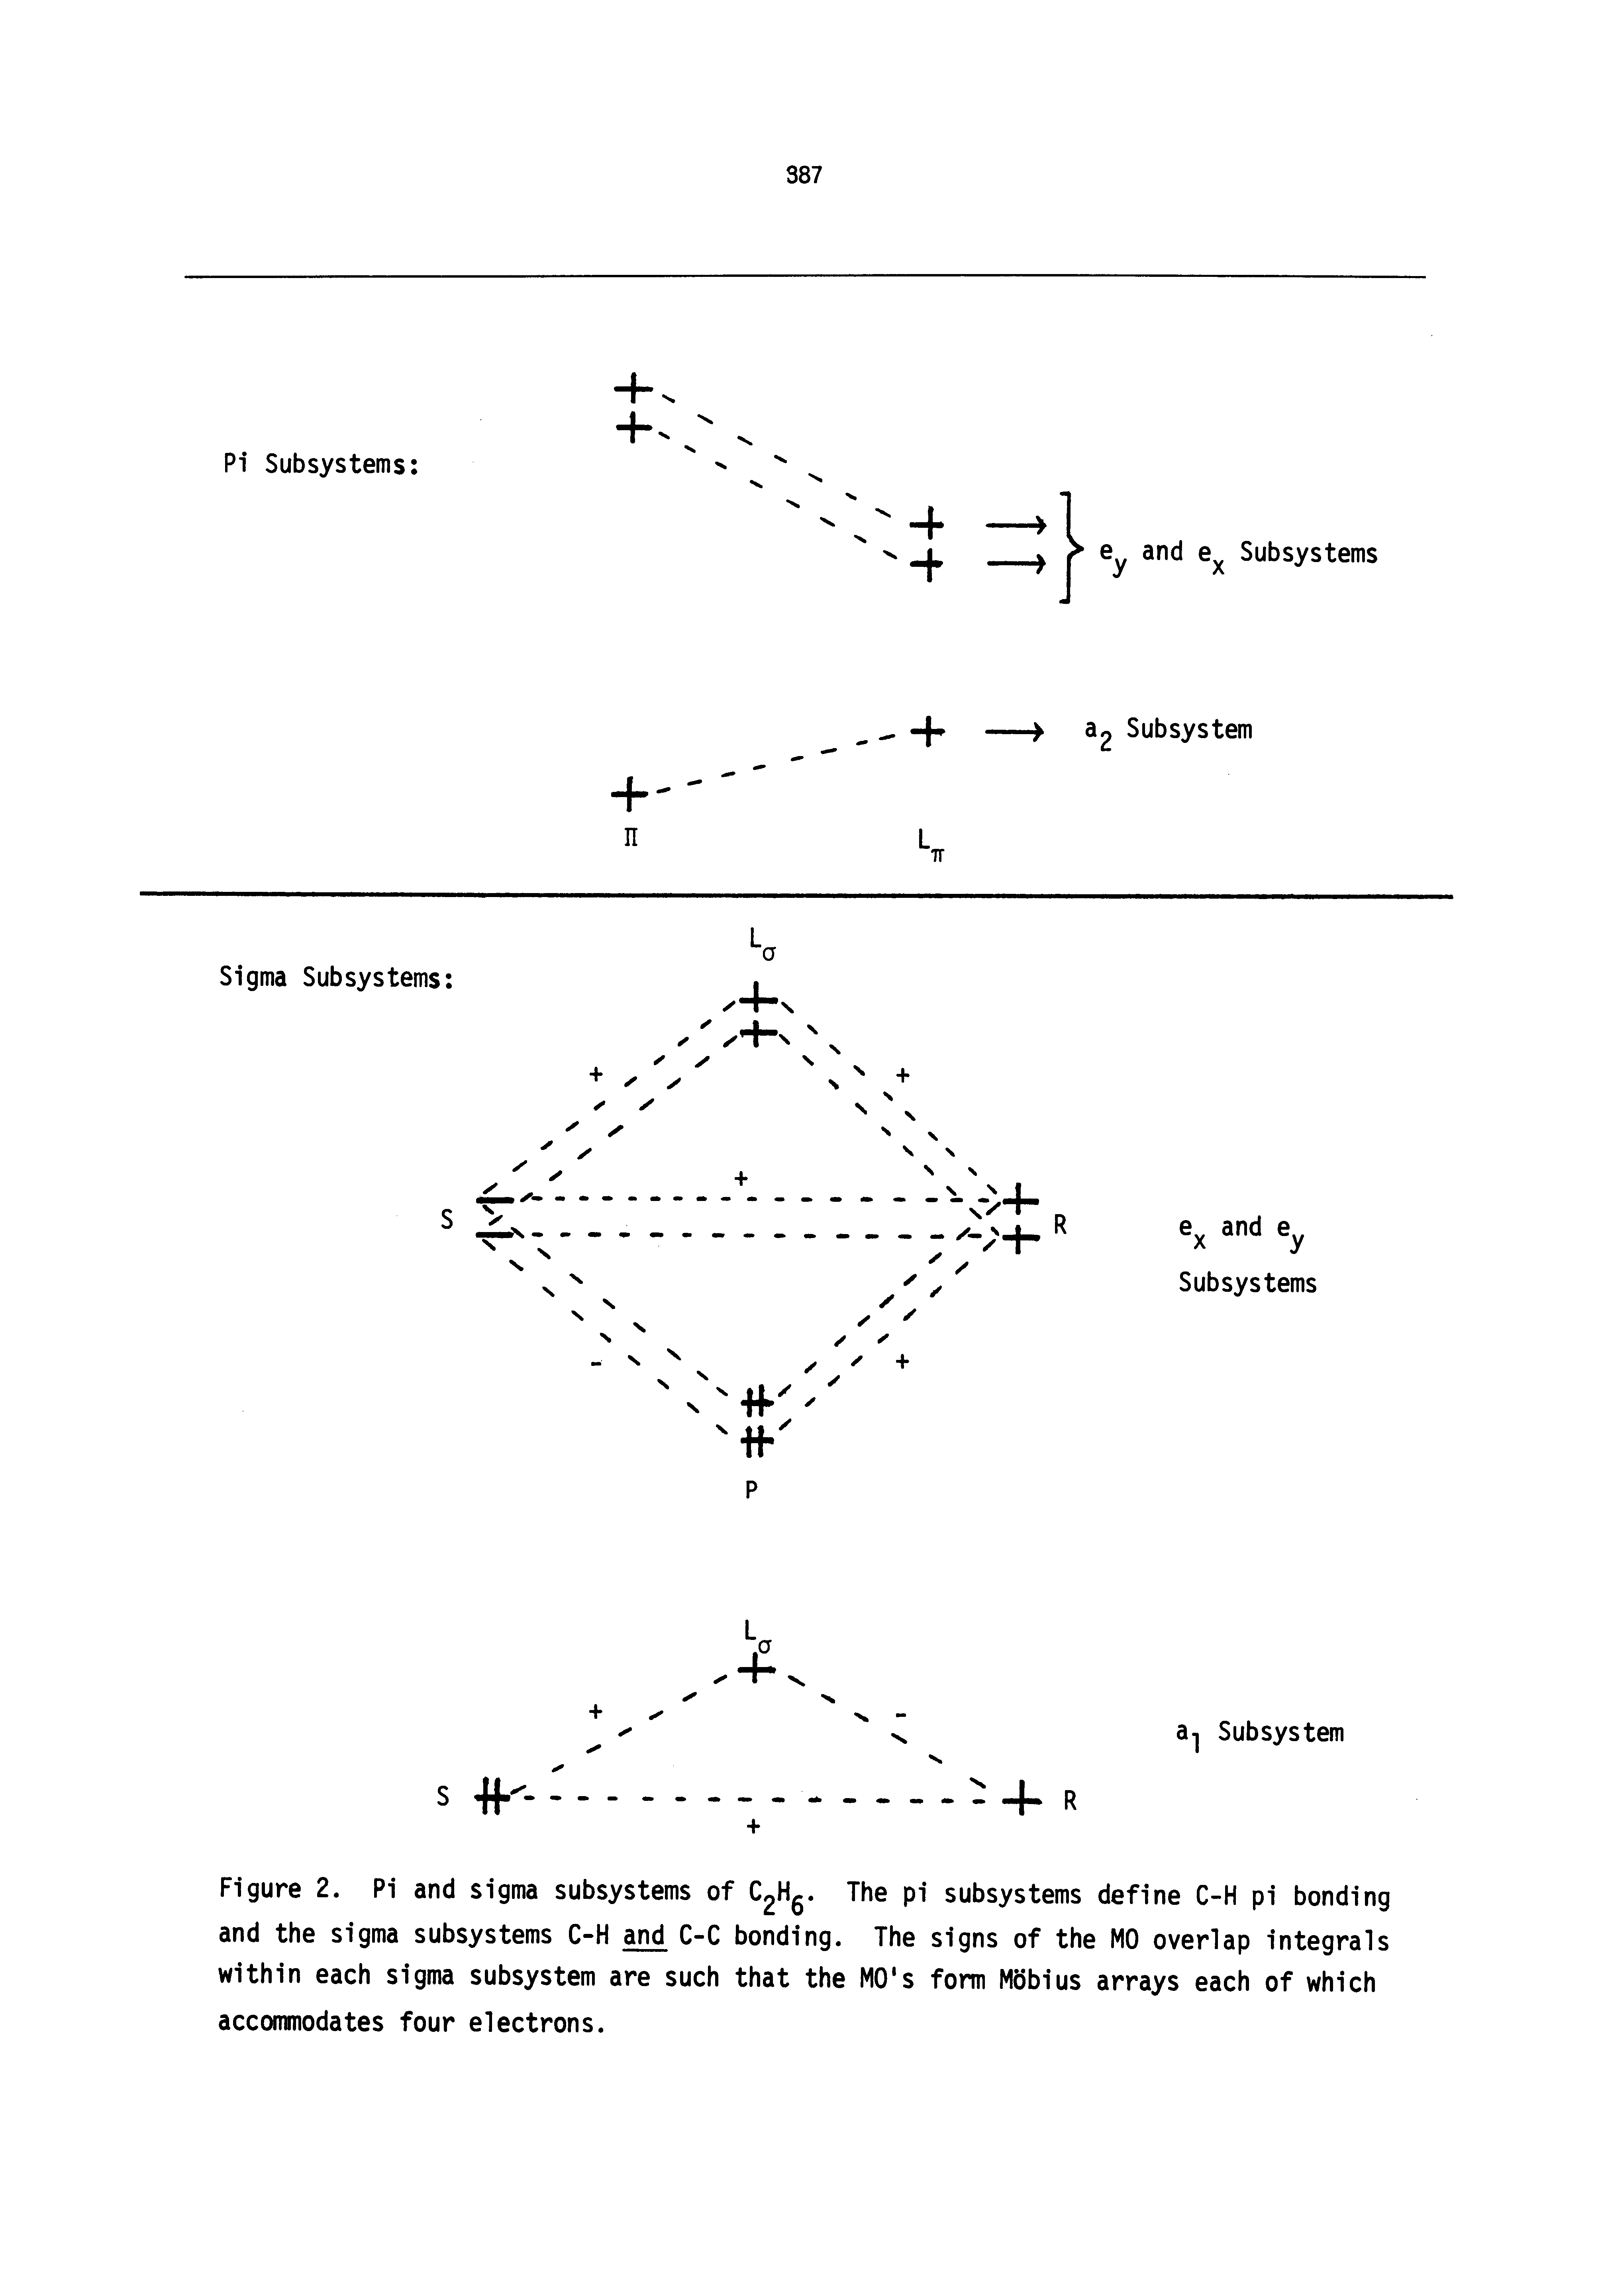 Figure 2. Pi and sigma subsystems of The pi subsystems define C-H pi bonding and the sigma subsystems C-H and C-C bonding. The signs of the MO overlap integrals within each sigma subsystem are such that the MO s form Mbbius arrays each of which accommodates four electrons.